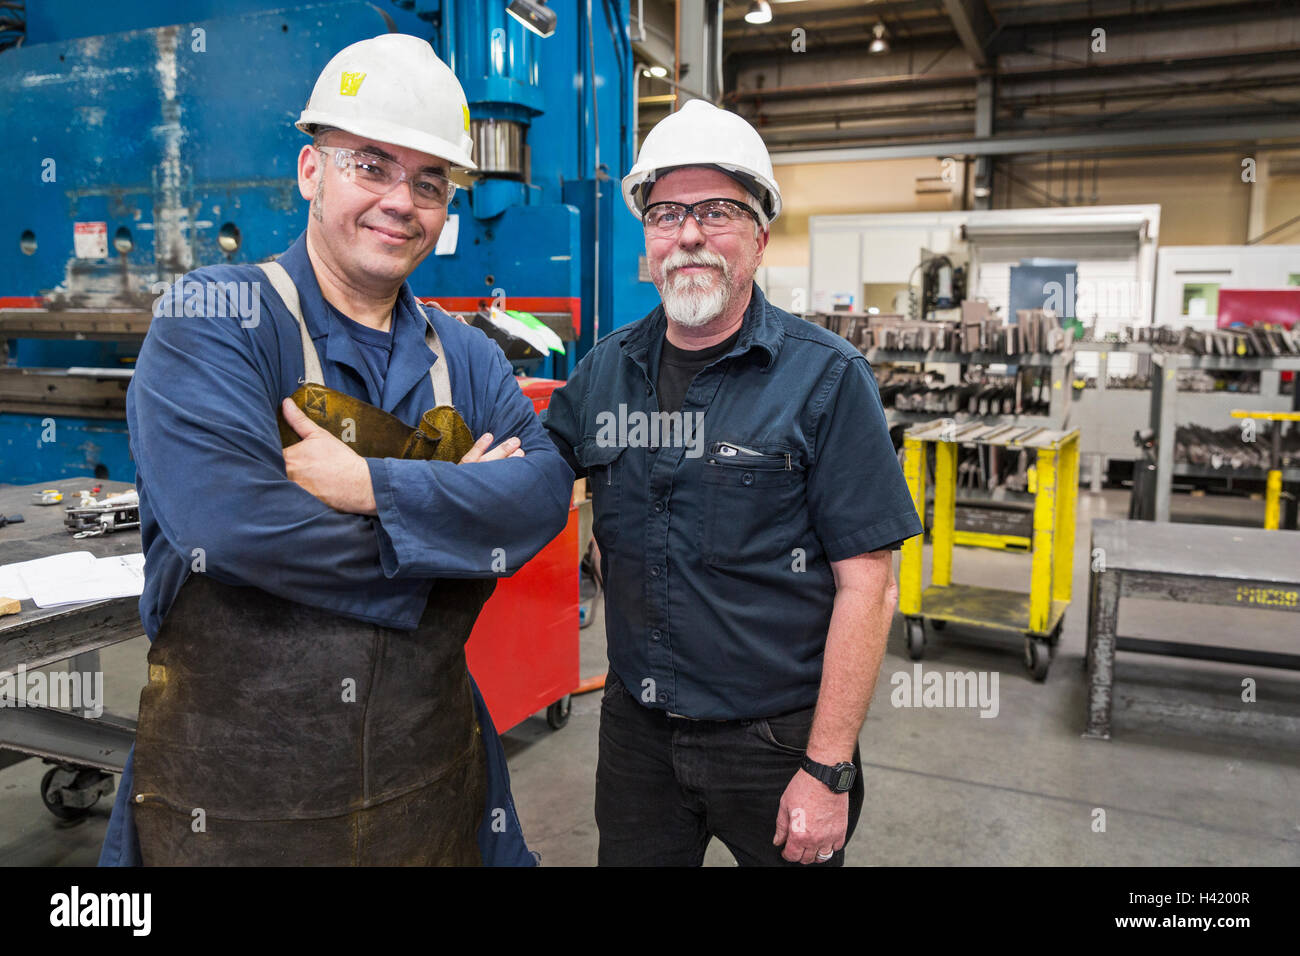 Smiling workers posing in factory Stock Photo